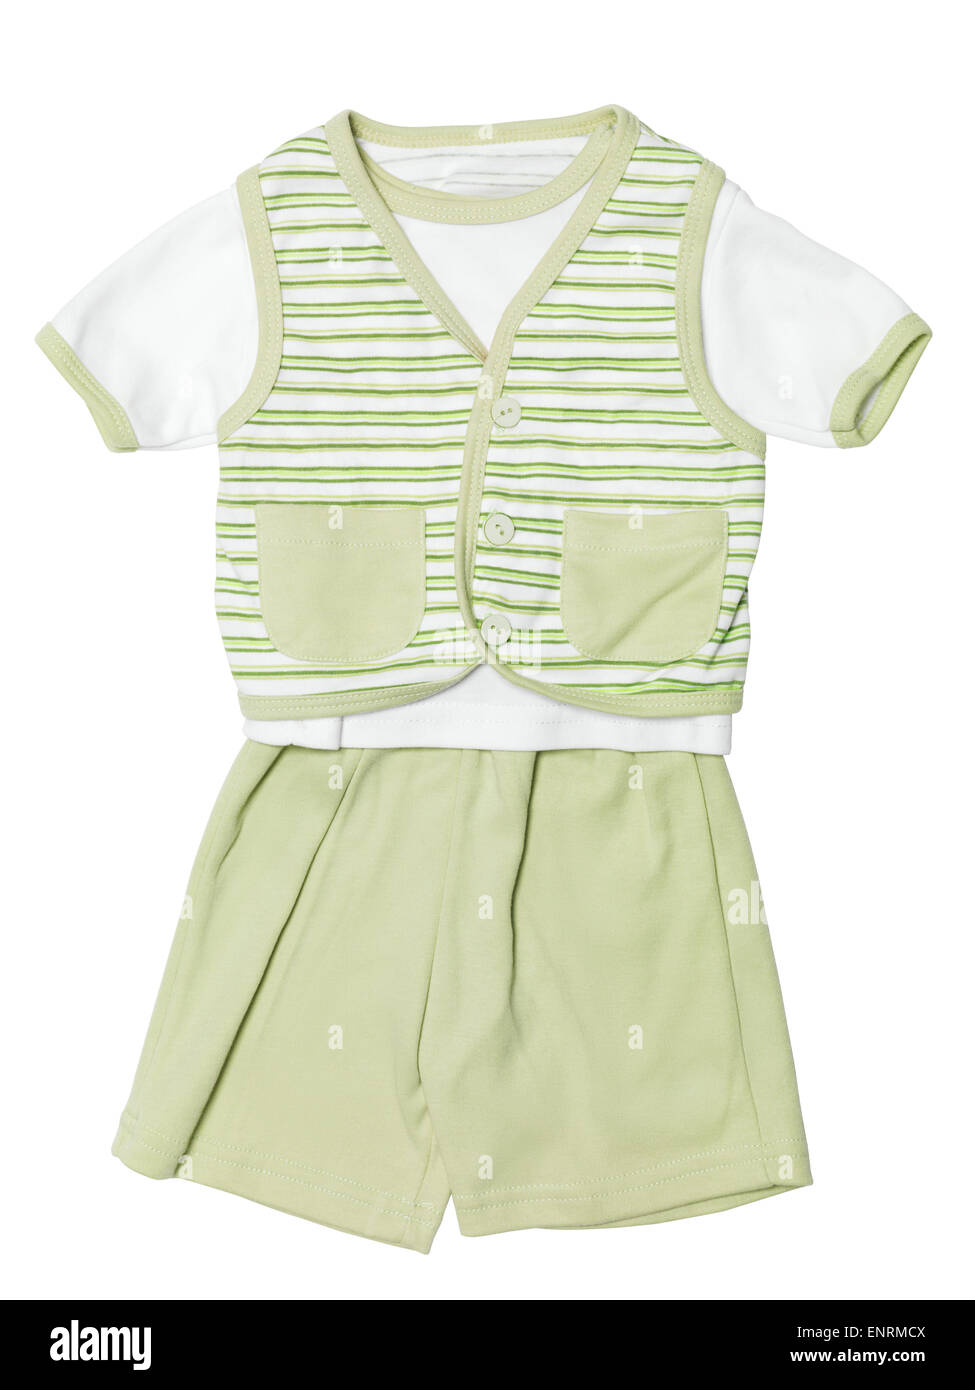 Baby boys green striped outfit, shirt, vest and shorts, clothing set isolated on white background with clipping path Stock Photo